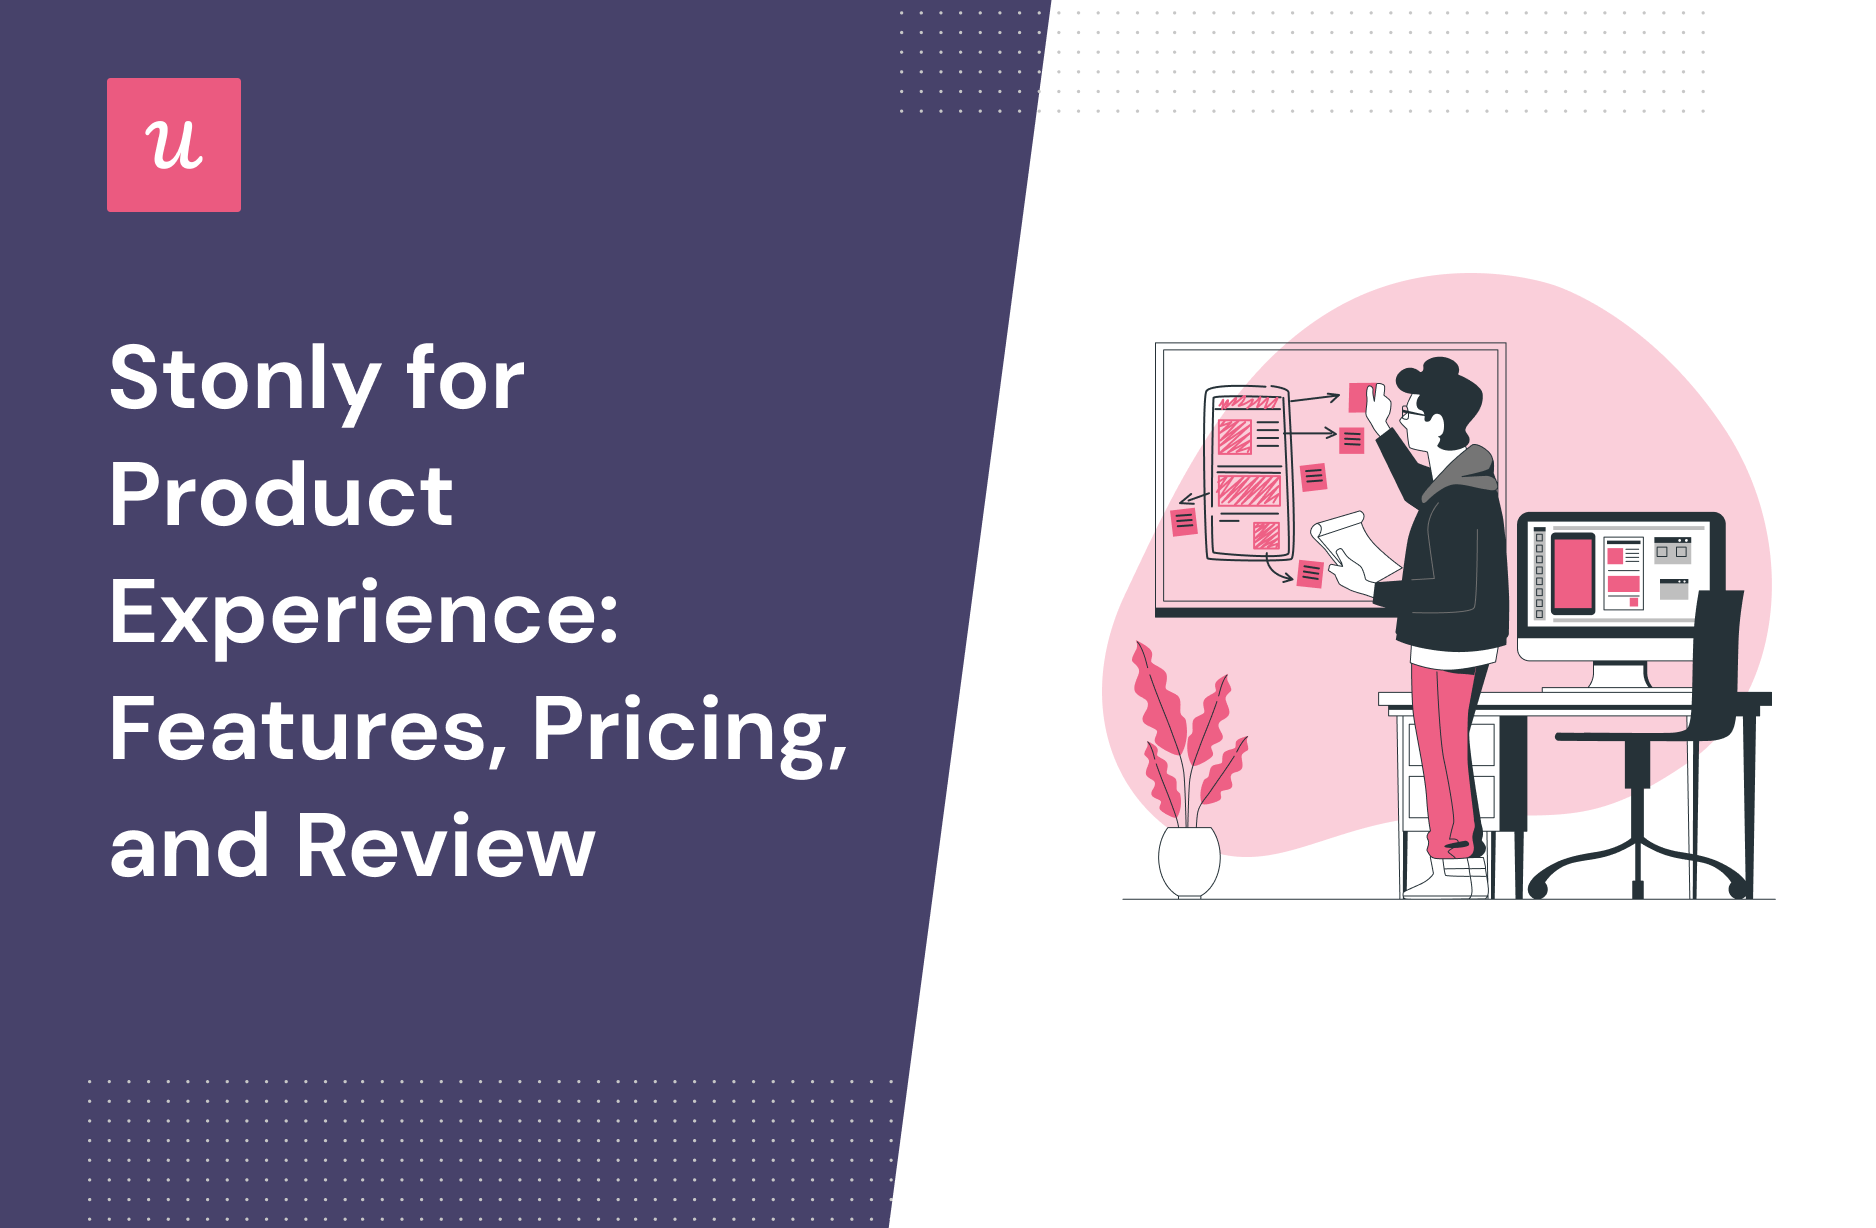 Stonly for Product Experience: Features, Pricing, and Review